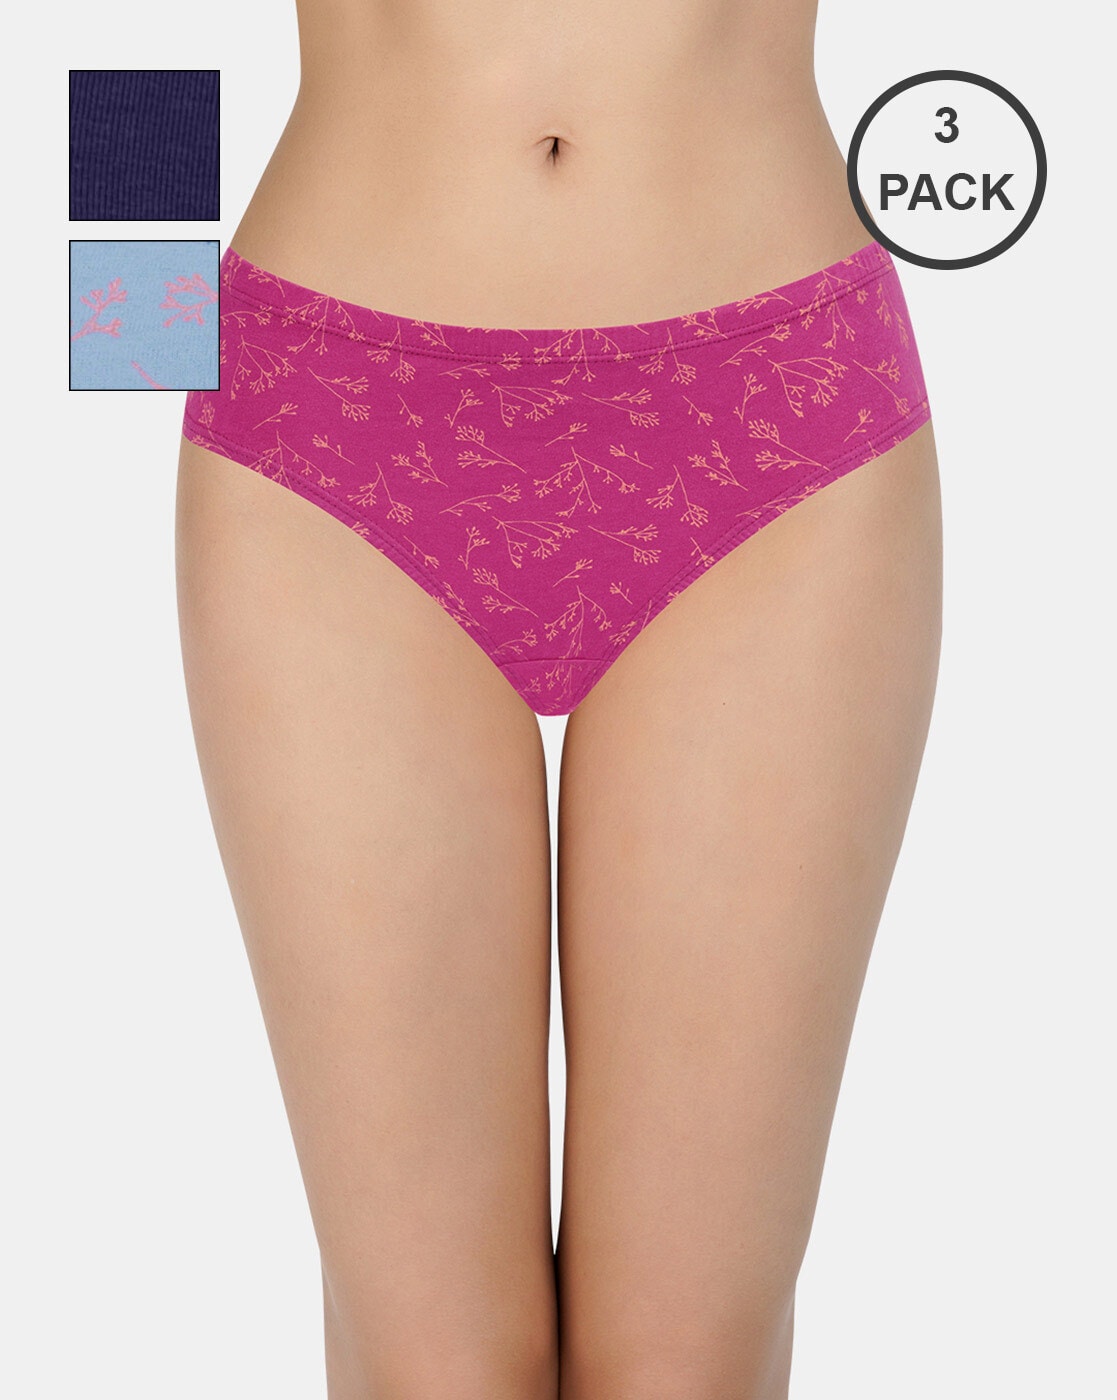 Buy Every De By Amante Pack of 3 Women Printed Bikini Briefs at Redfynd